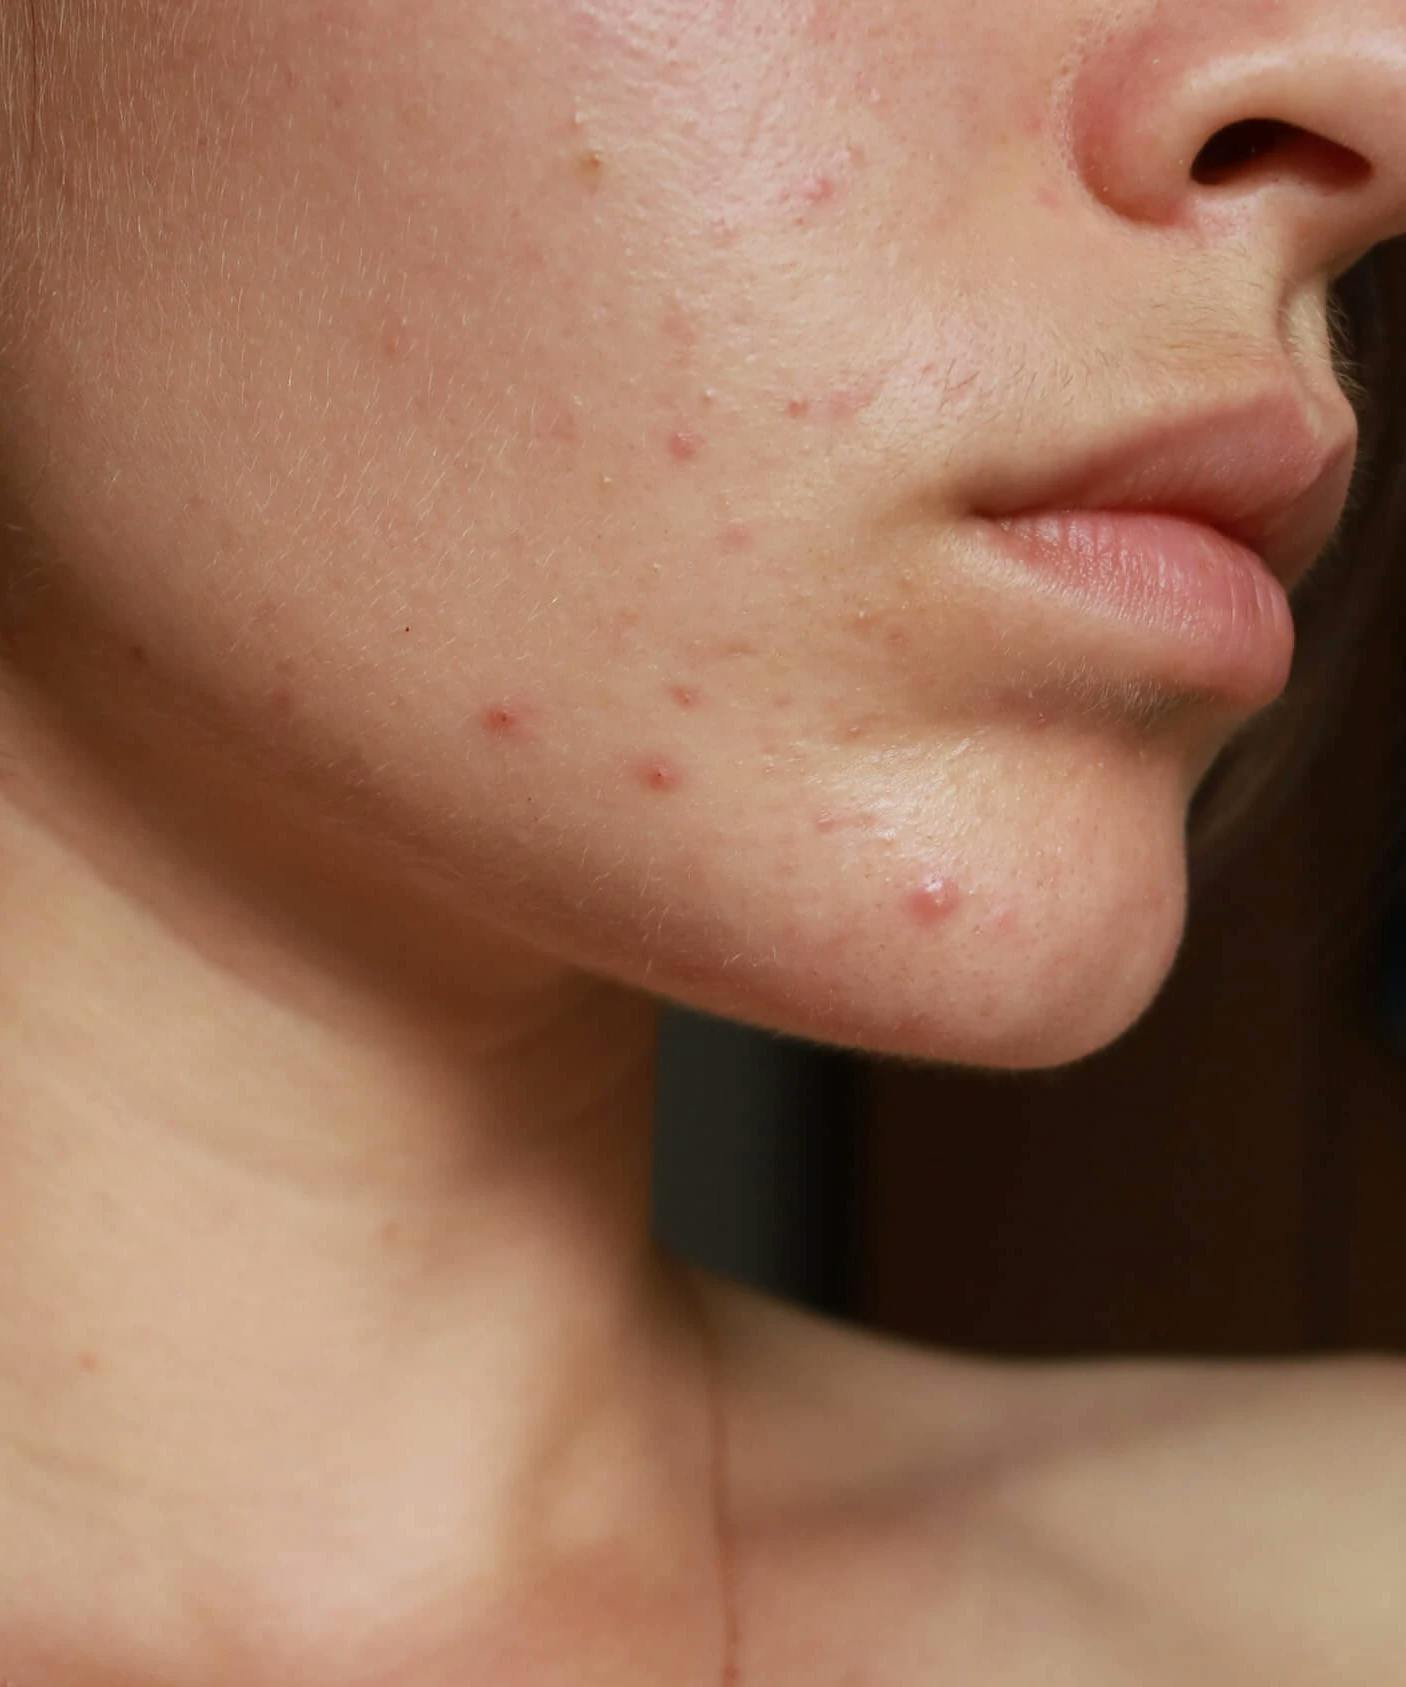 What Your Skin Issues Could Be Telling You About Your Health, According To An Aesthetician